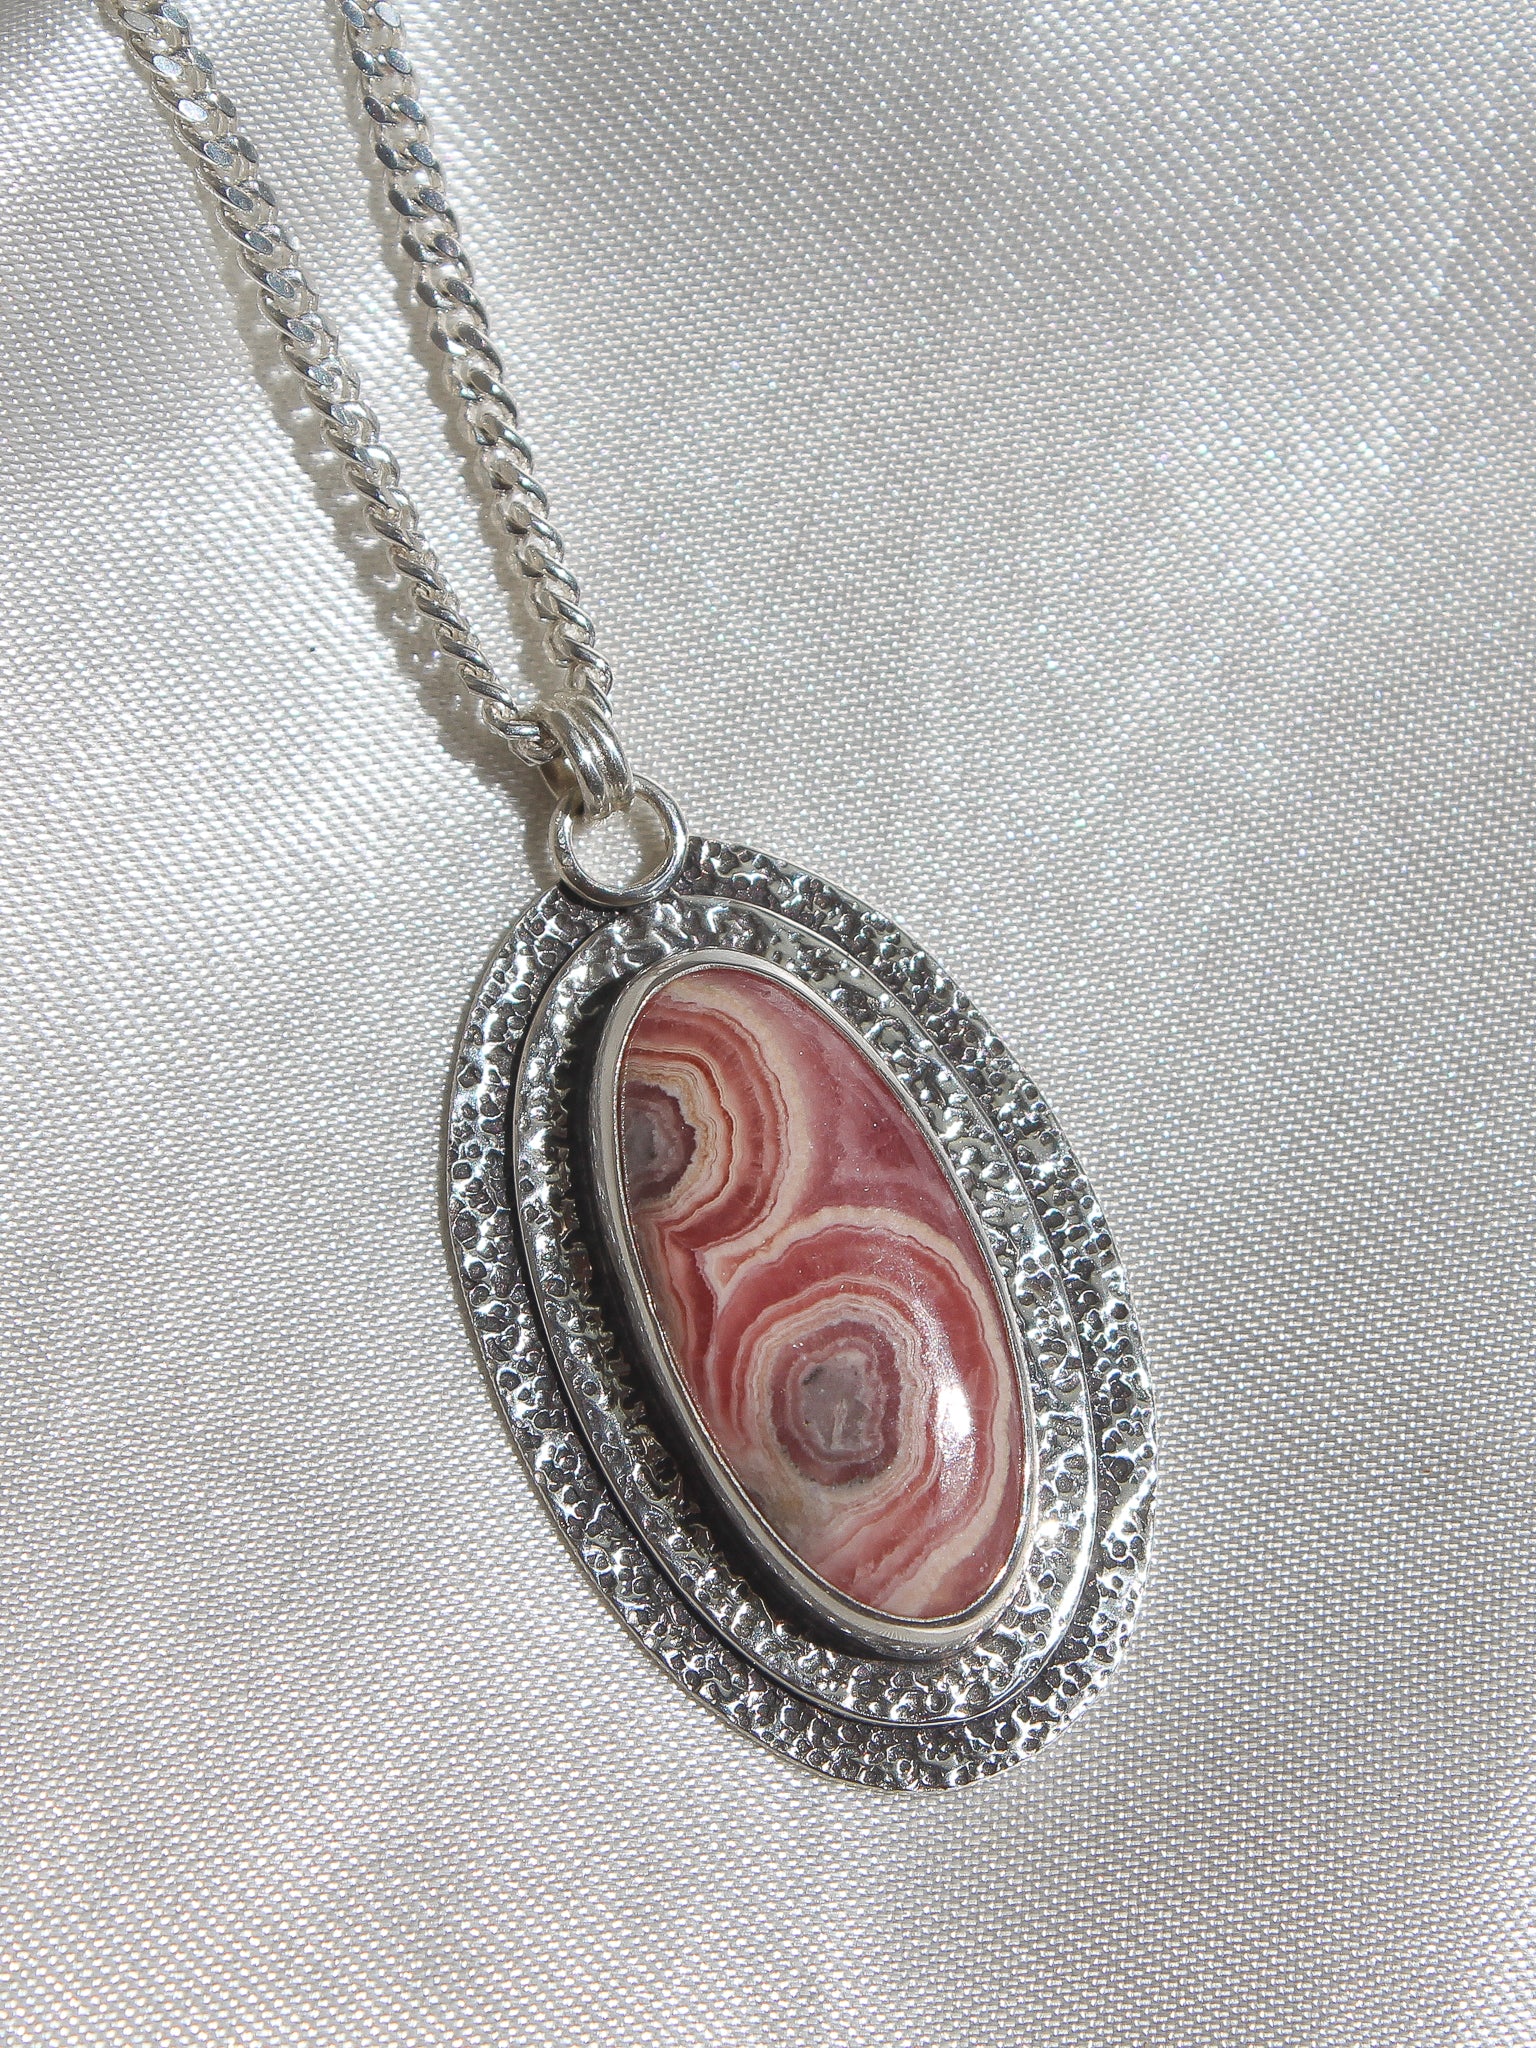 Handmade 925 sterling silver pendant with rhodochrosite stone, textured setting, lily and William jewelry